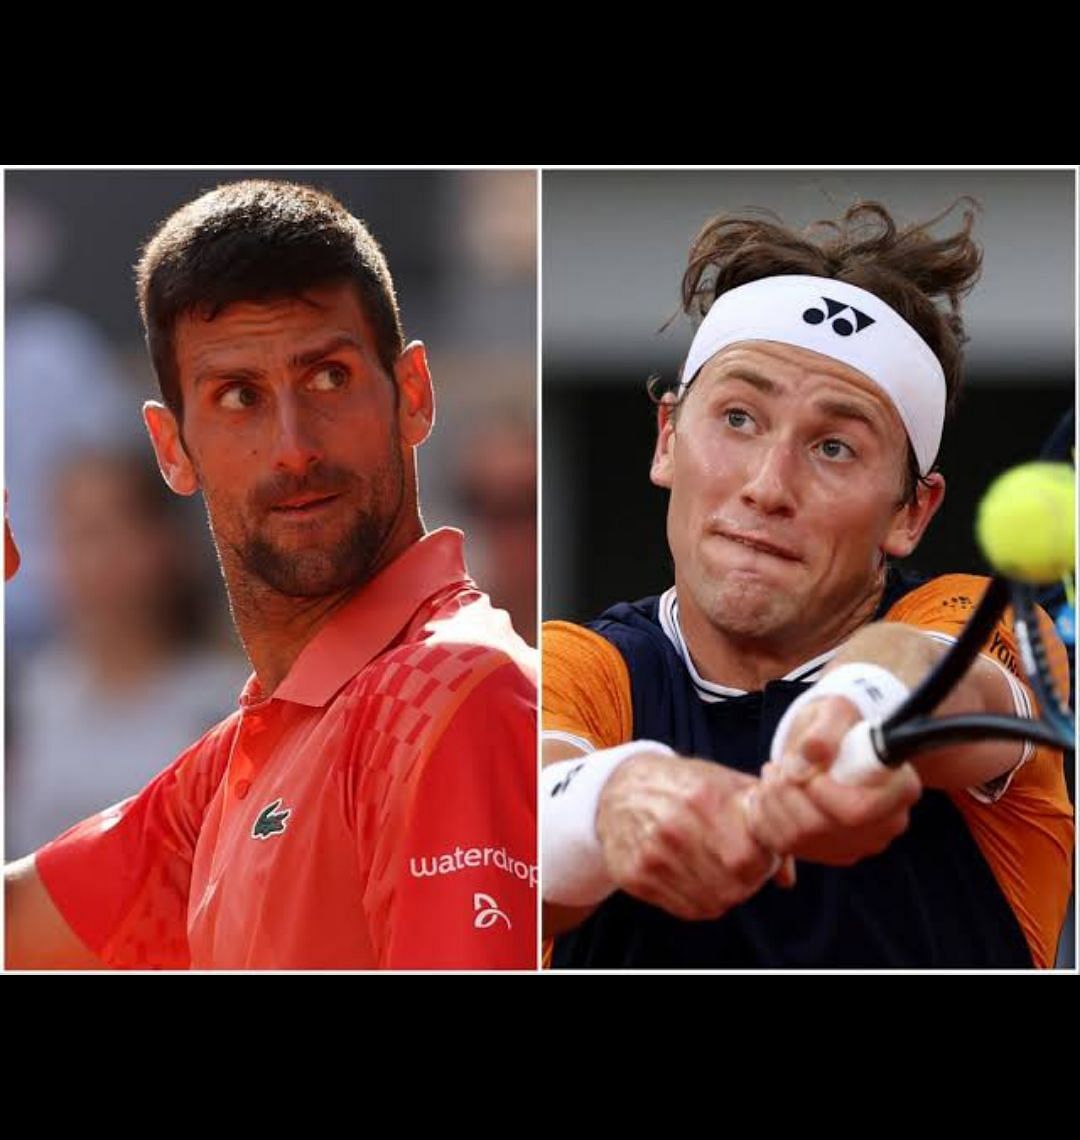 Djokovic will start as the favourite against Ruud in the French Open final